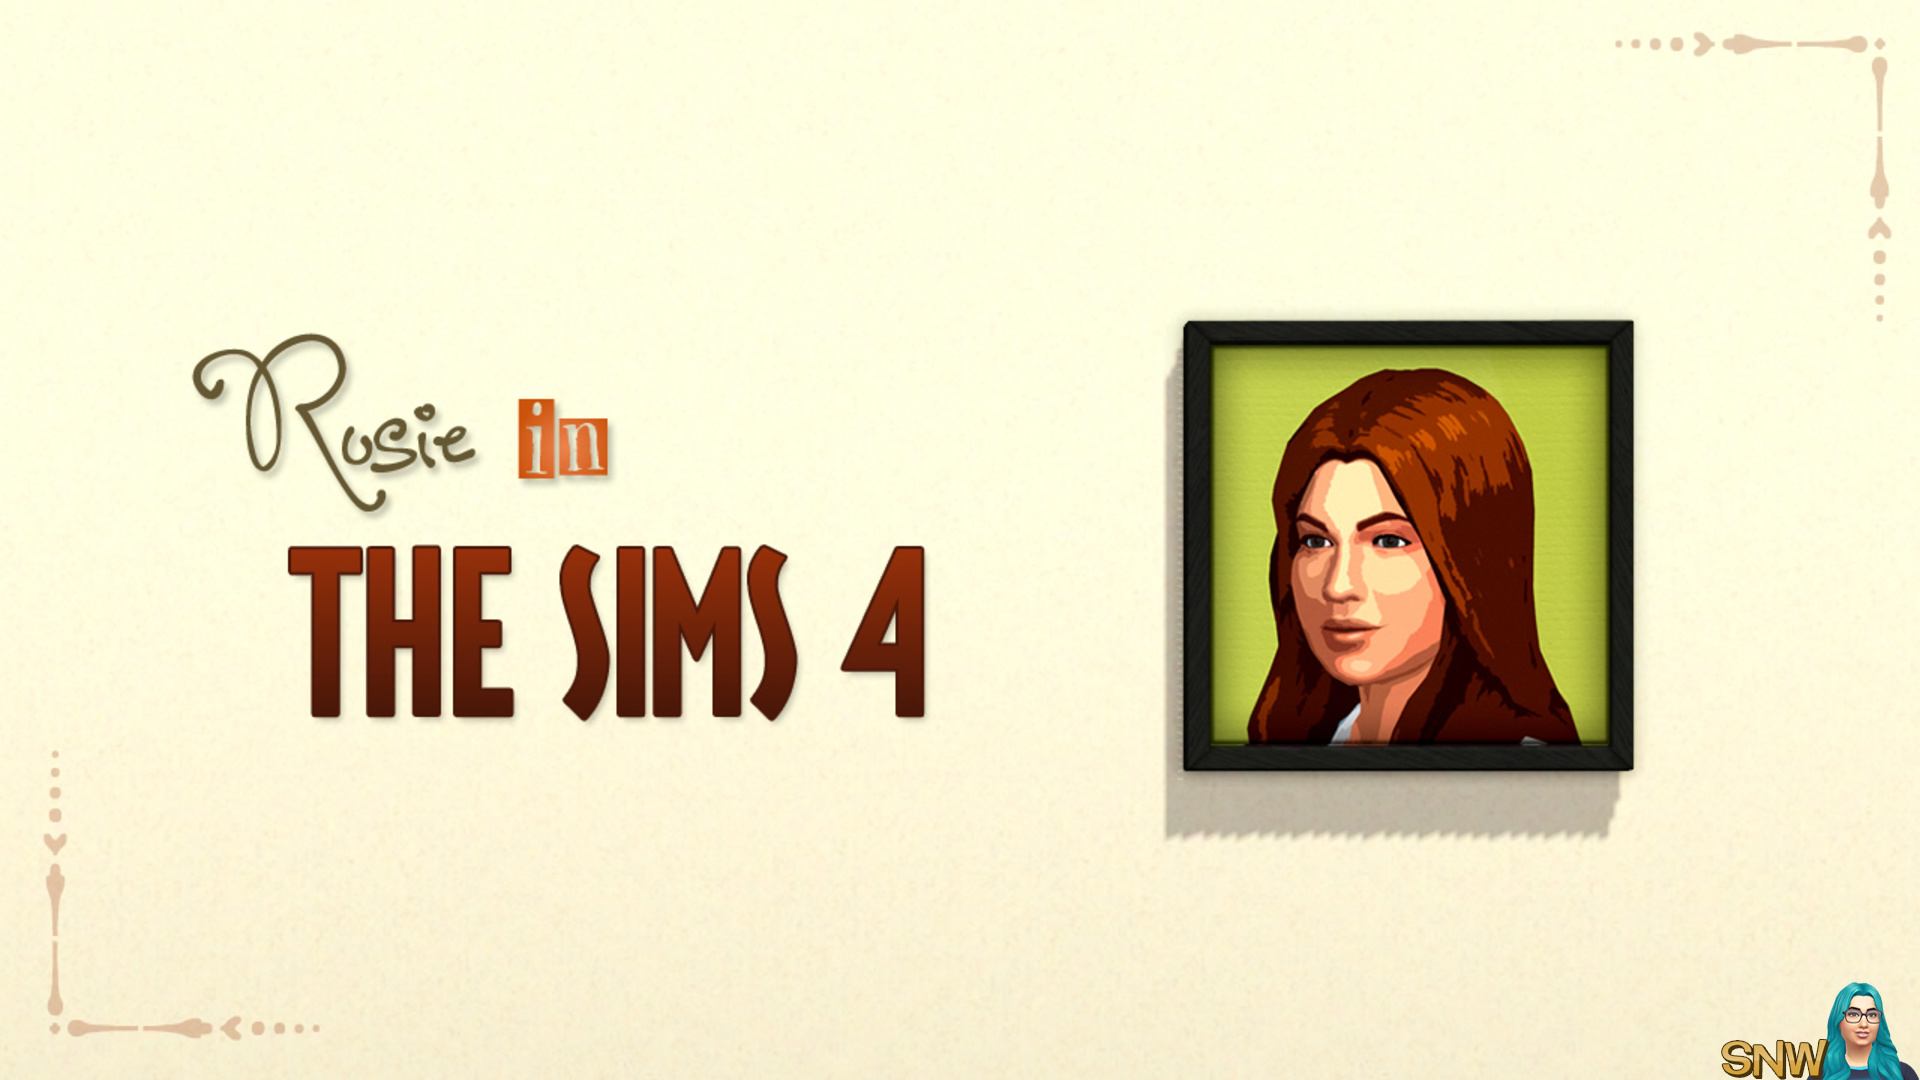 Rosie in The Sims 4 painting